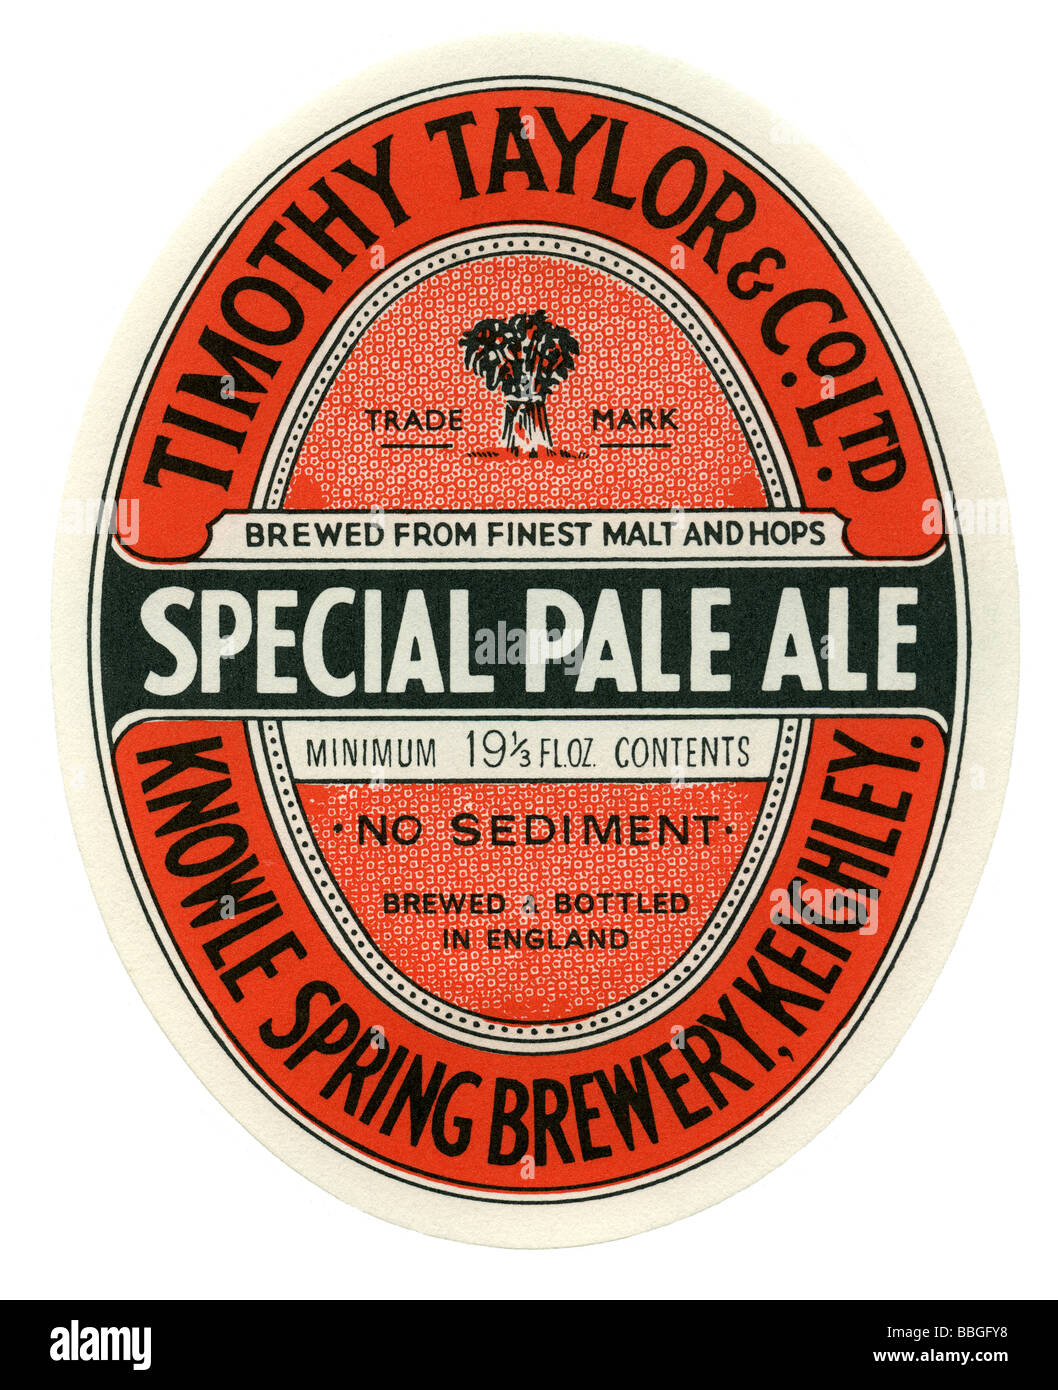 Old British beer label for Timothy Taylor's Special Pale Ale, Keighley, West Yorkshire Stock Photo